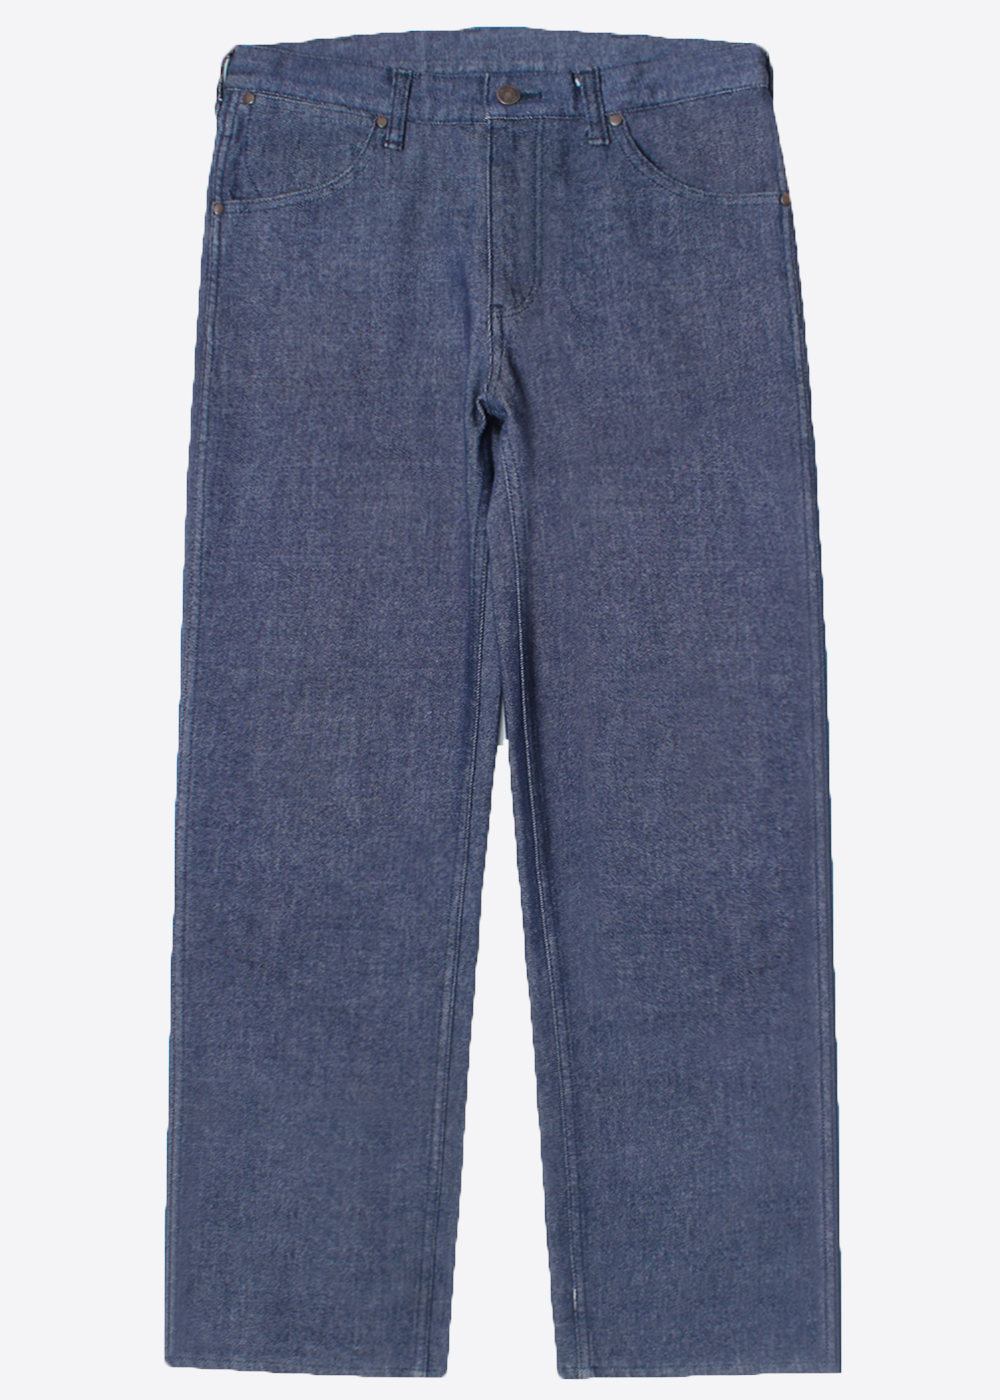 BEAUTY &amp; YOUTH BY UNITED ARROWS‘straight fit’ denim pant